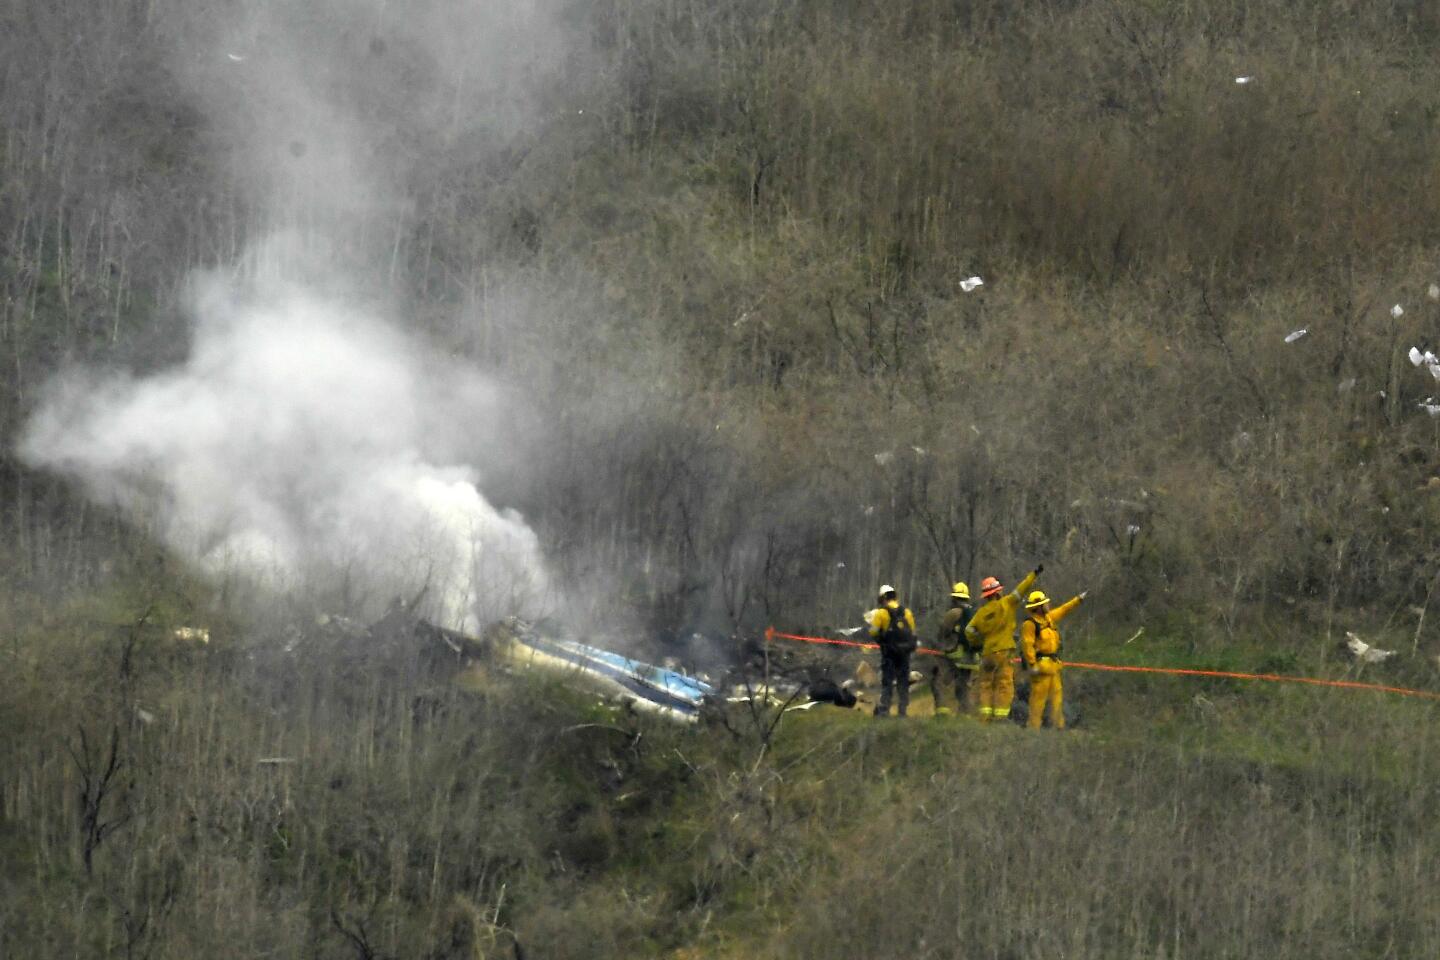 Firefighters work the scene of a helicopter crash where former NBA star Kobe Bryant died Sunday in Calabasas.